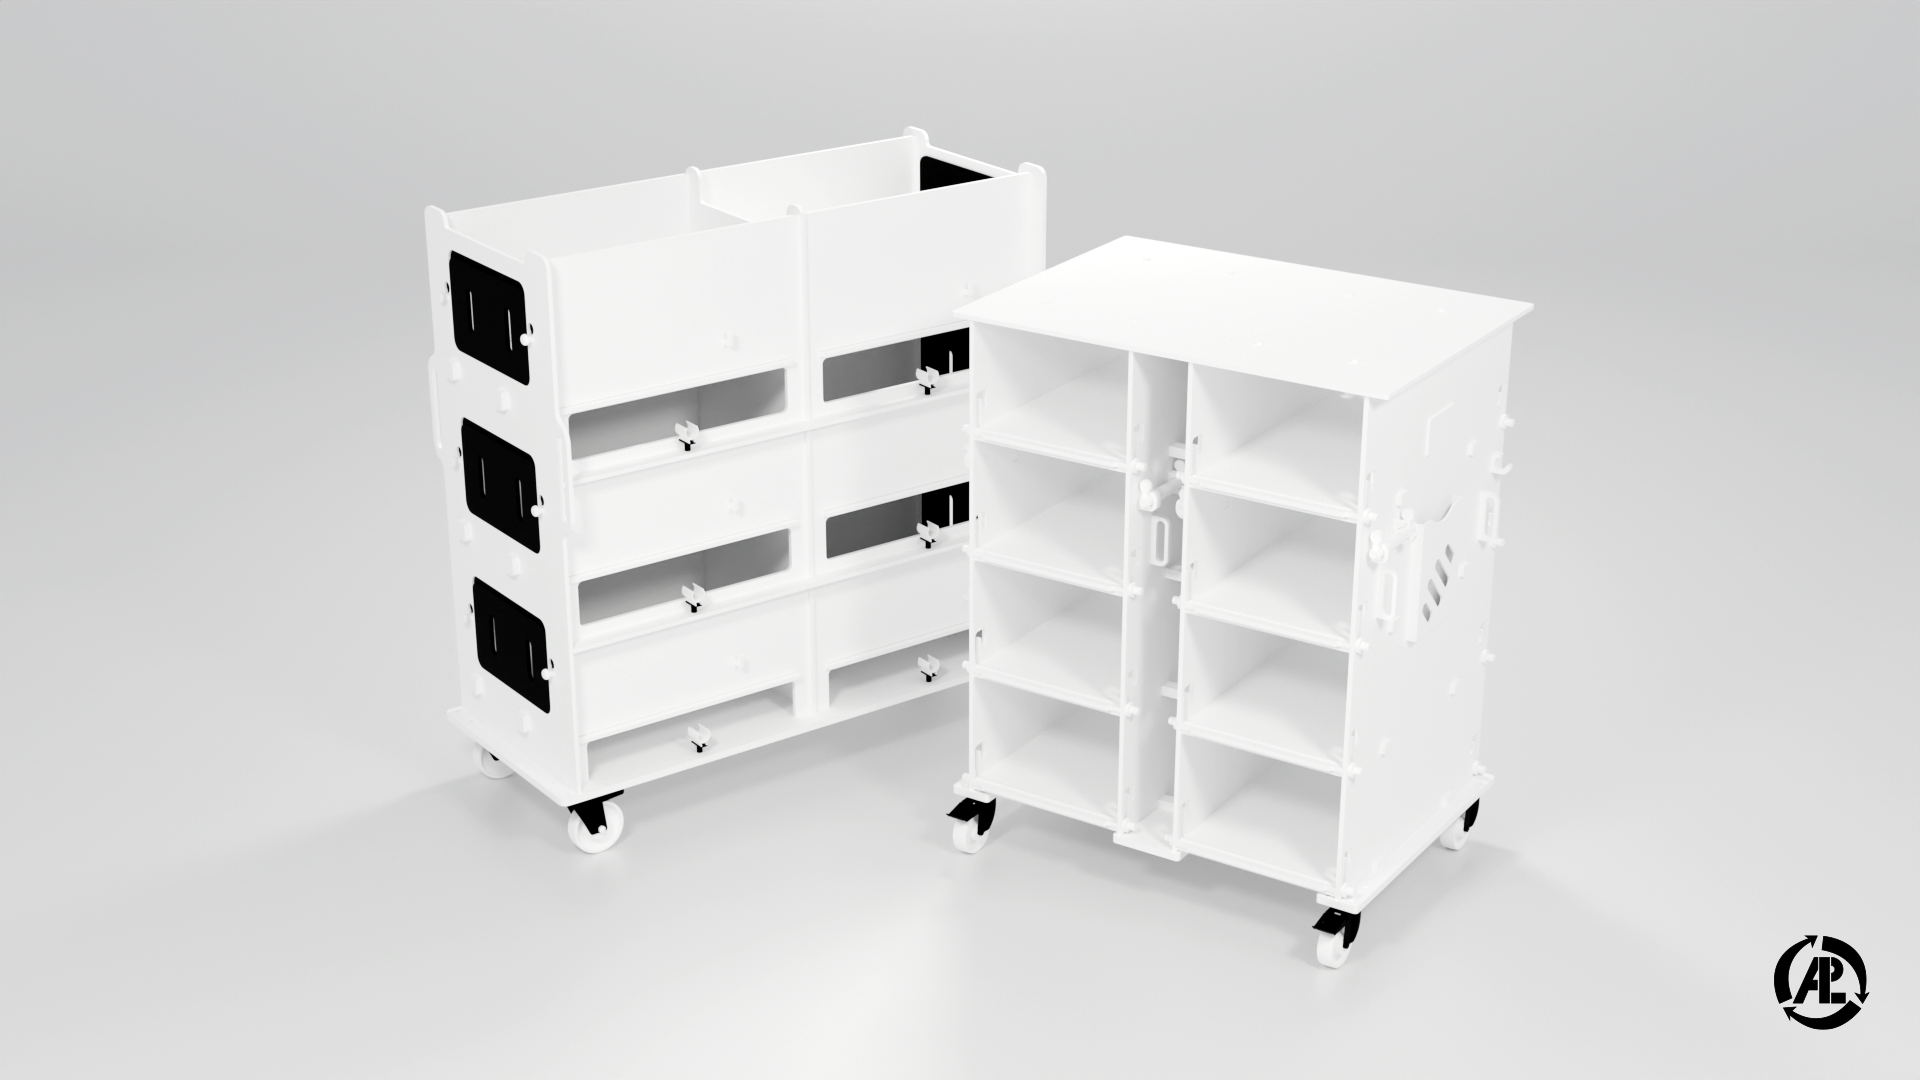 Cabinets & Carts: ALLpaQ Innovation for your Cleanroom